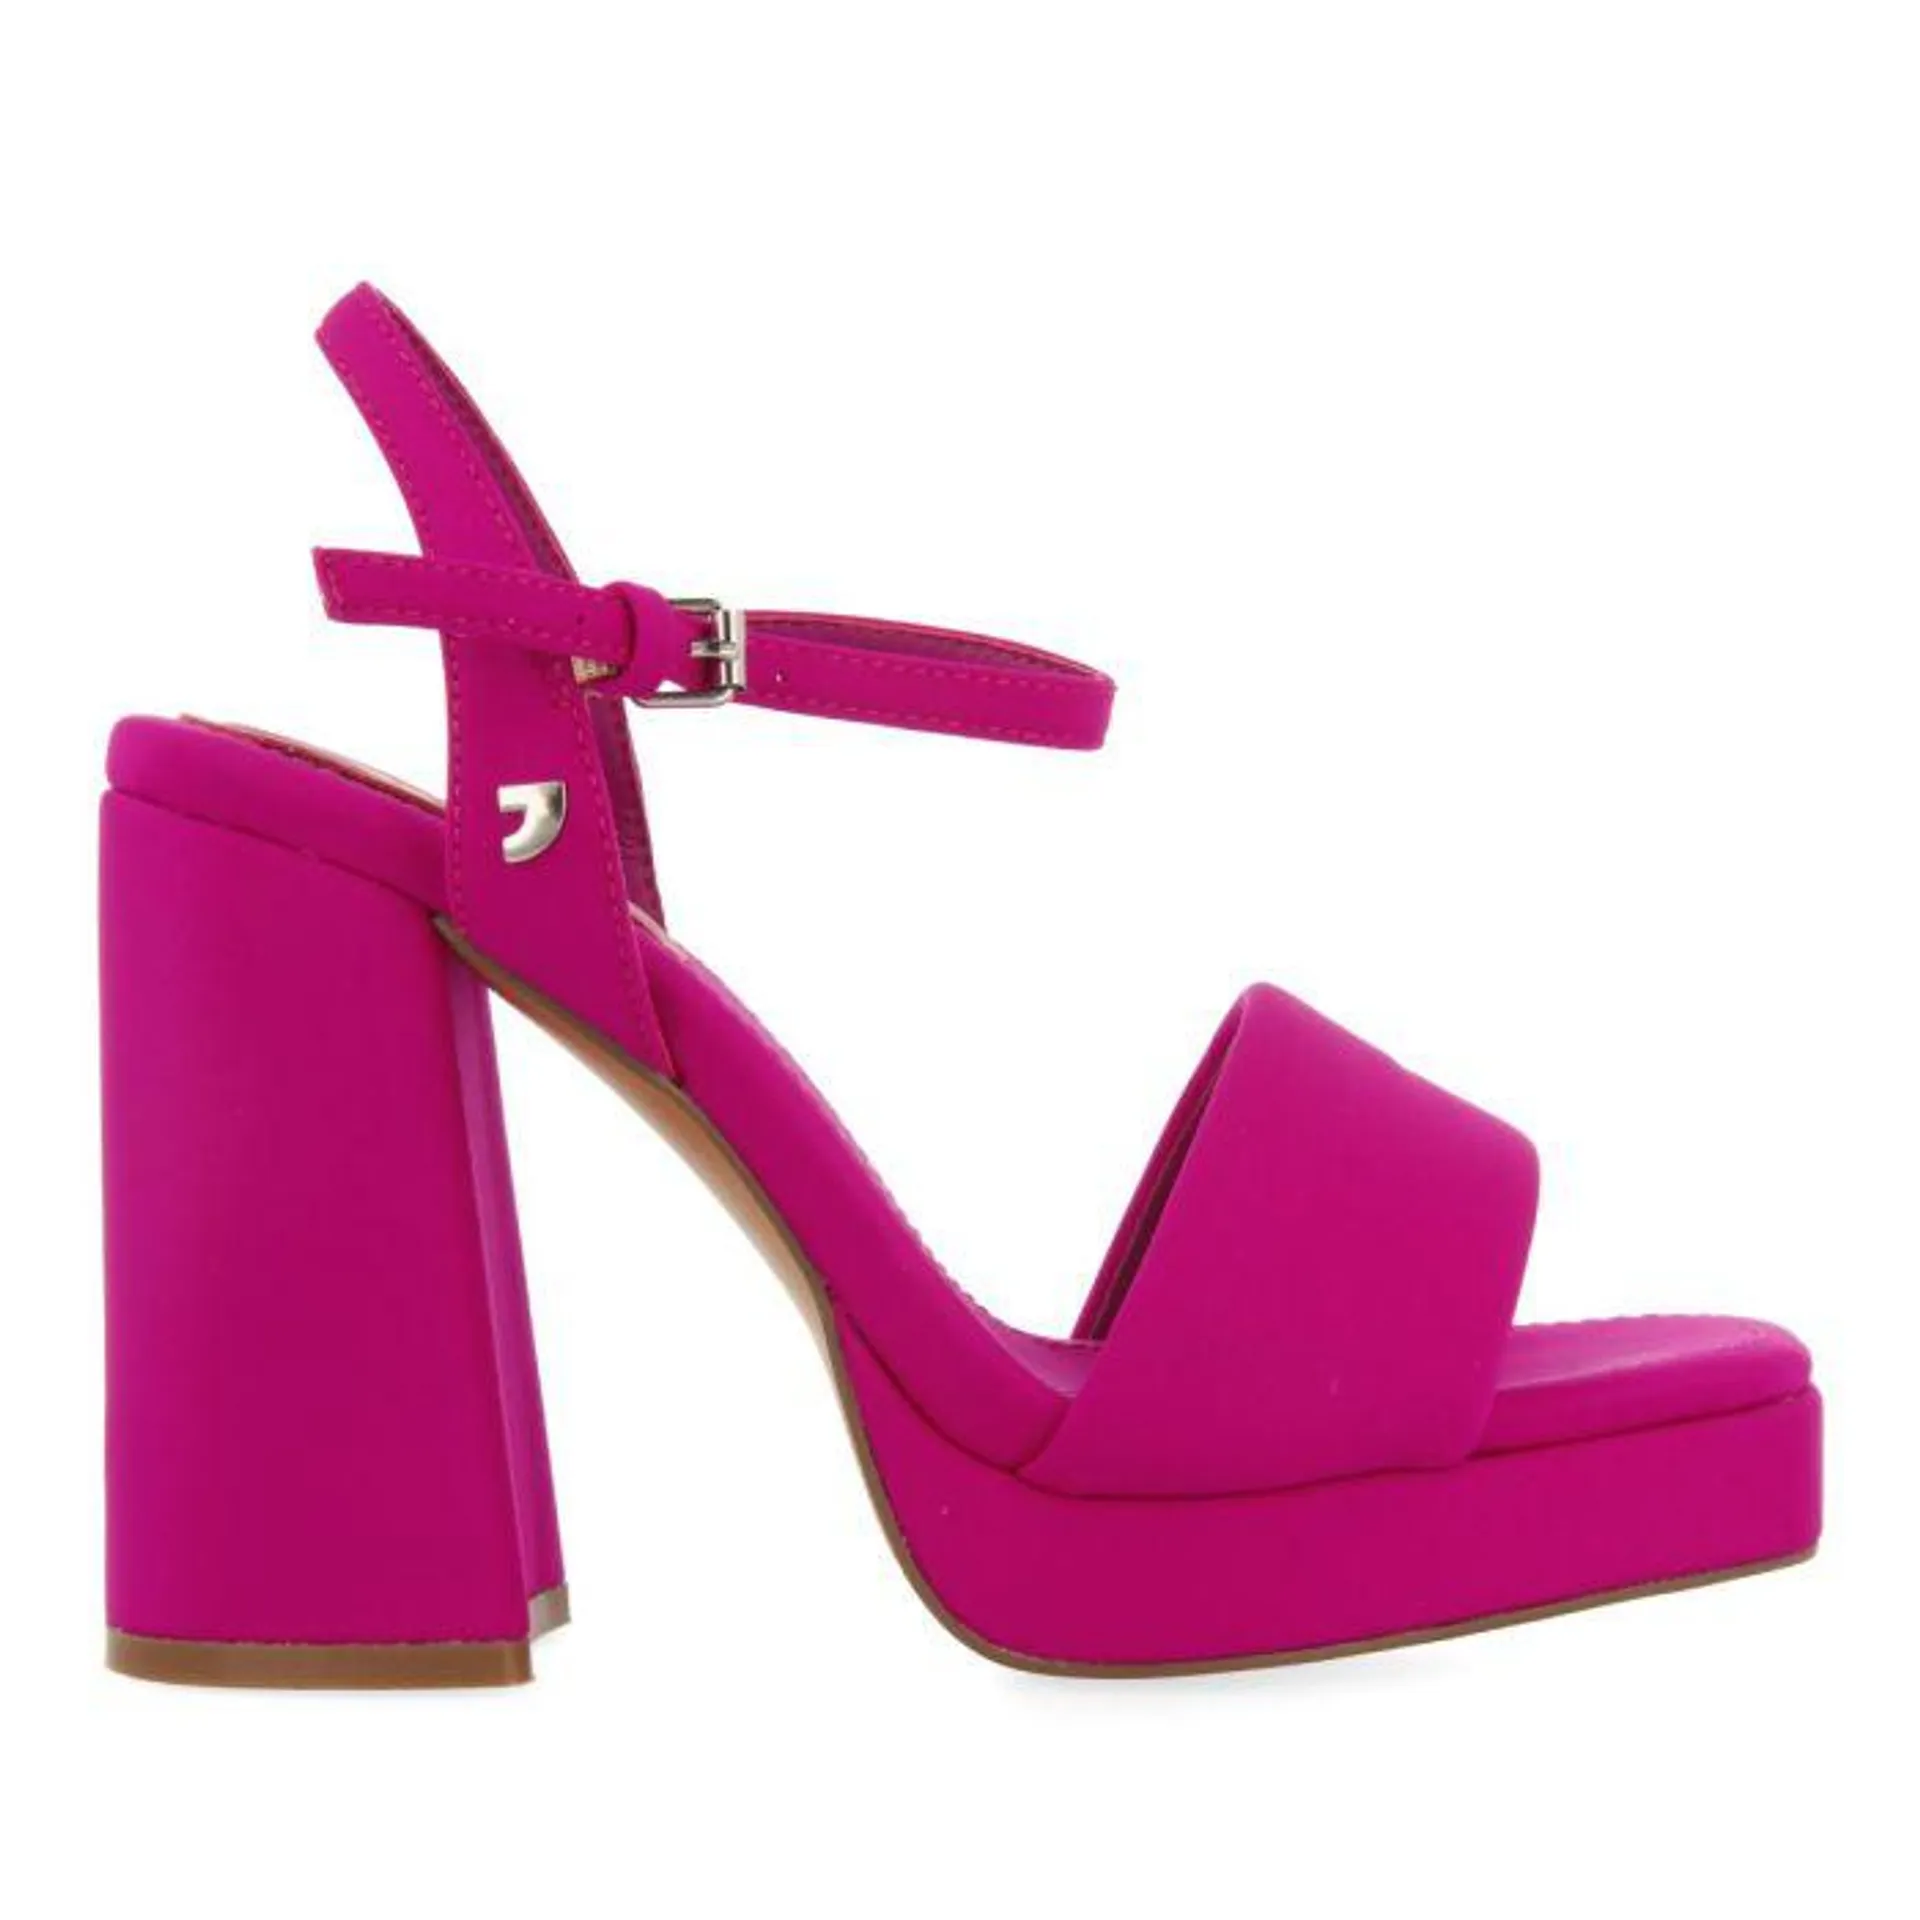 FUCHSIA HIGH HEEL SANDALS WITH PADDED STRAP FOR WOMEN DENTON